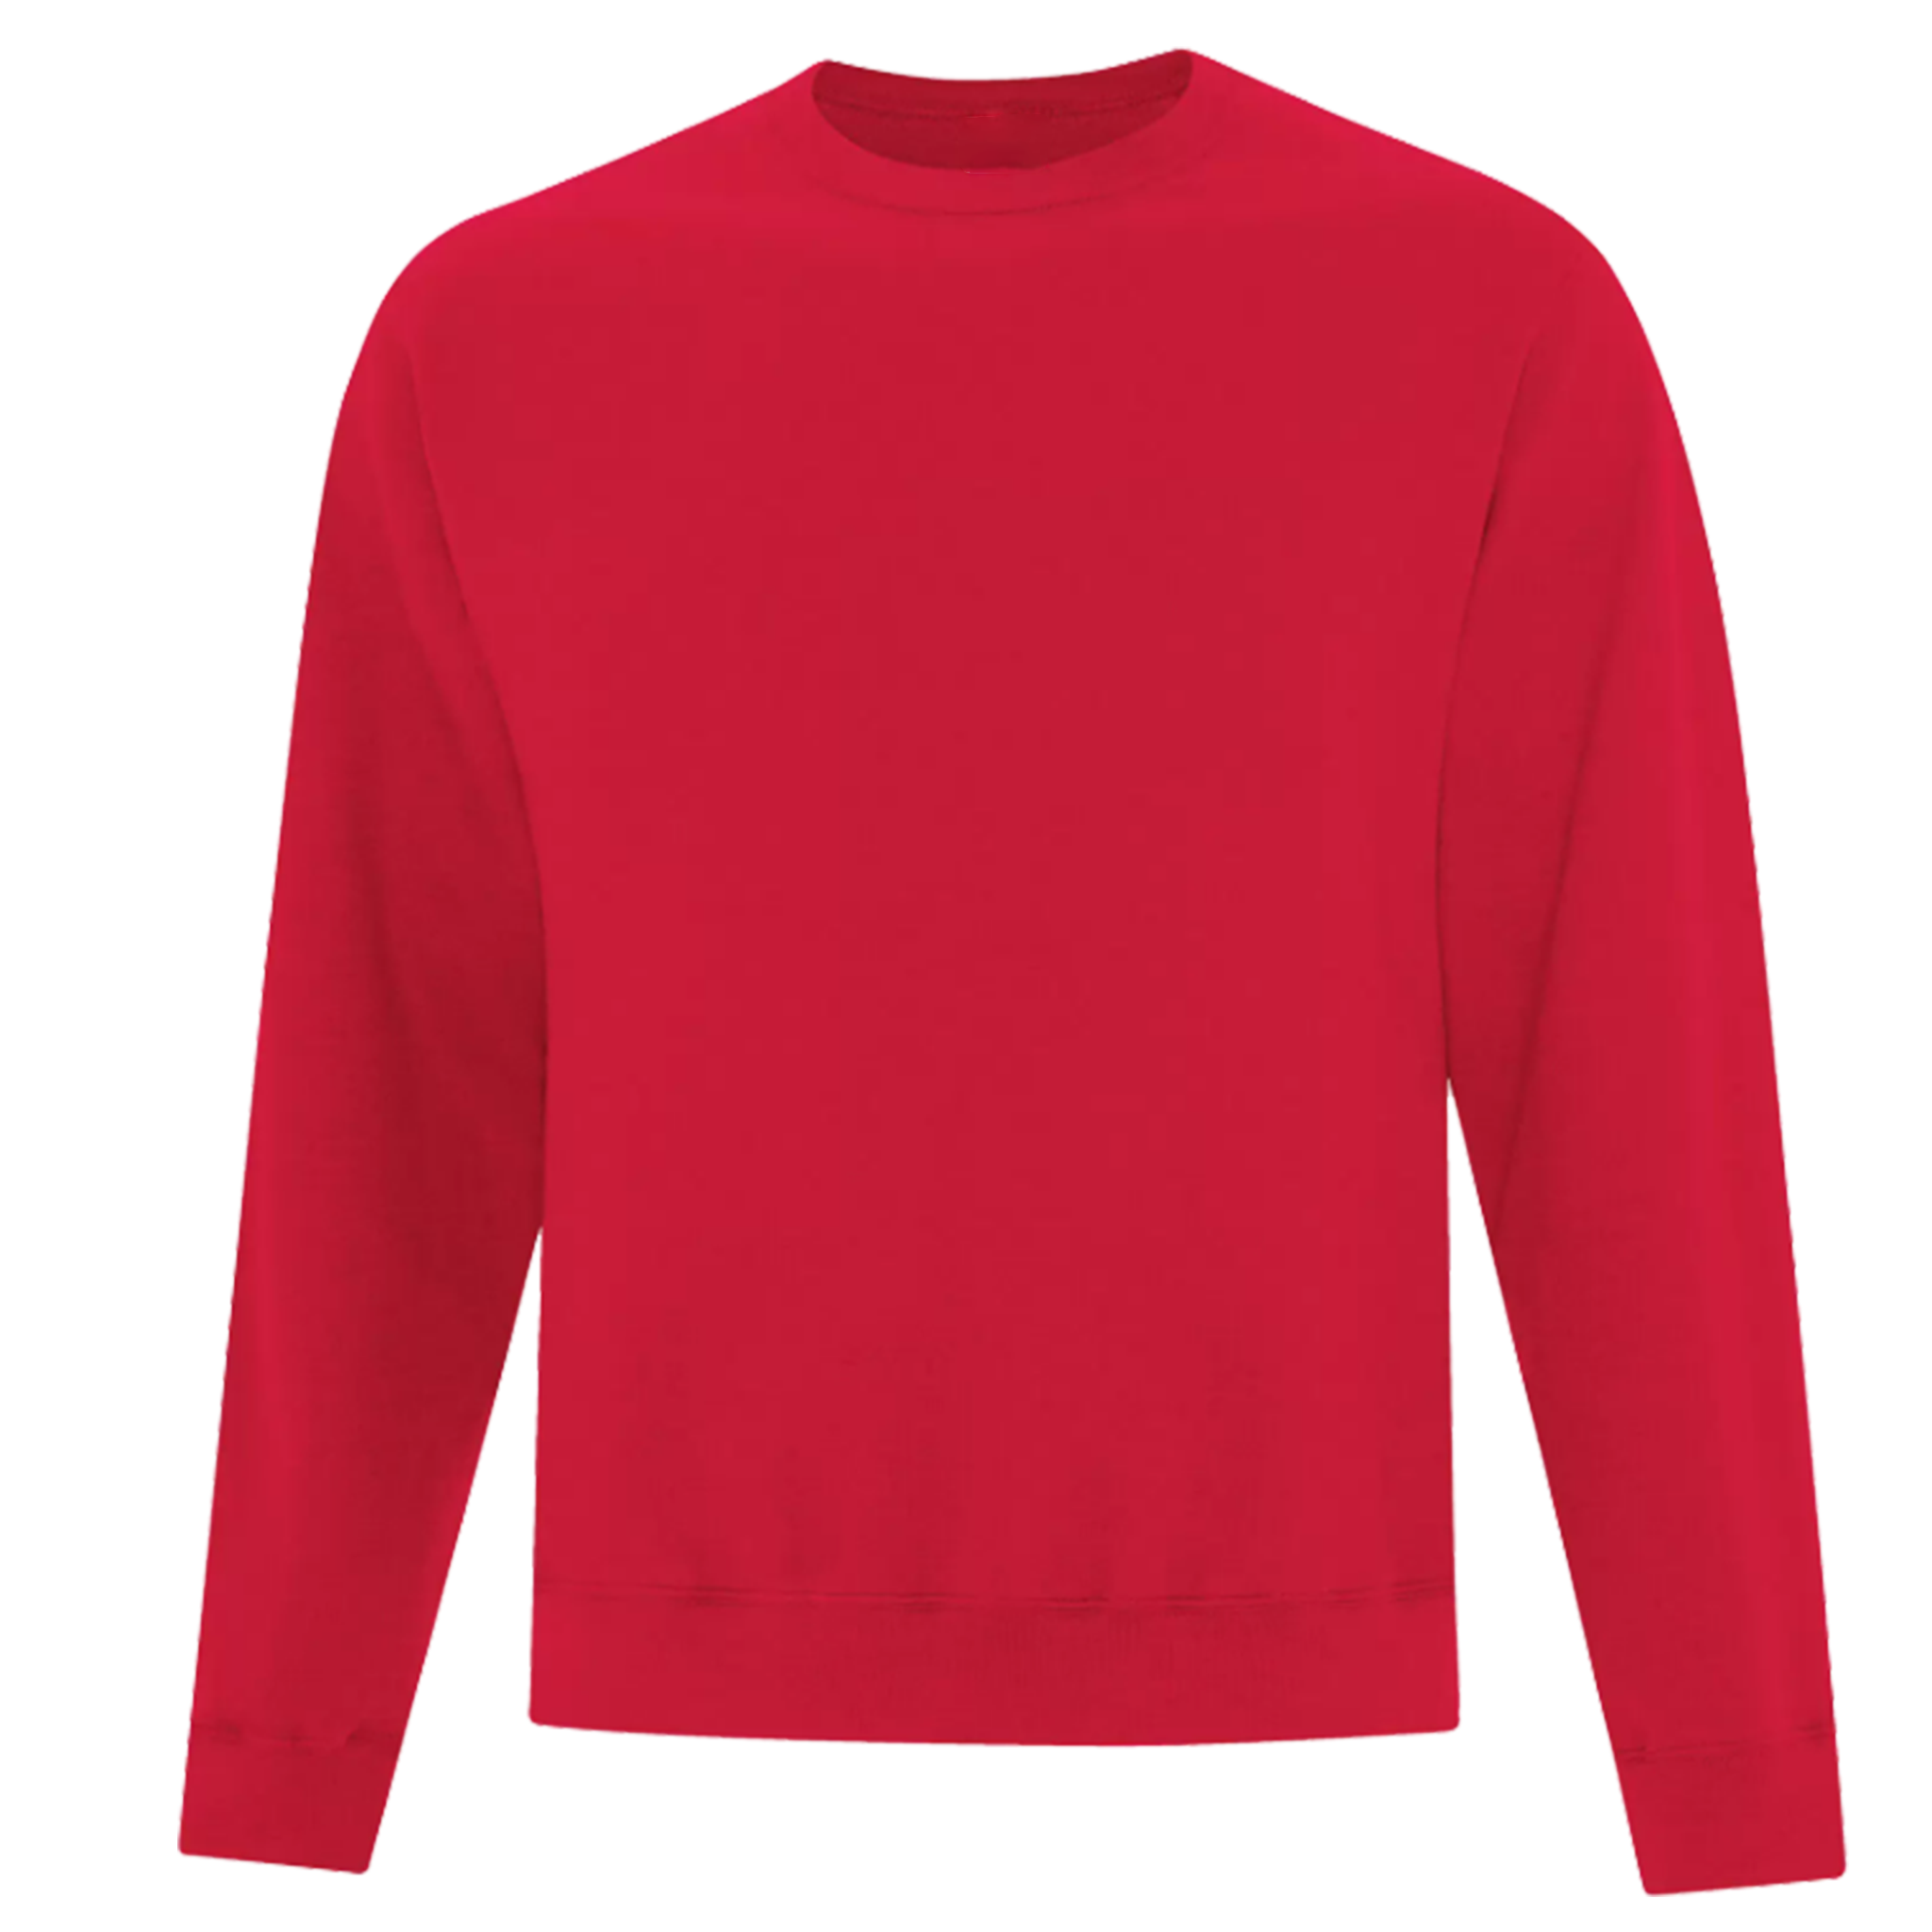 Reflections Apparel Crewneck Sweater - Adult Unisex Sizing S-3XL - Red